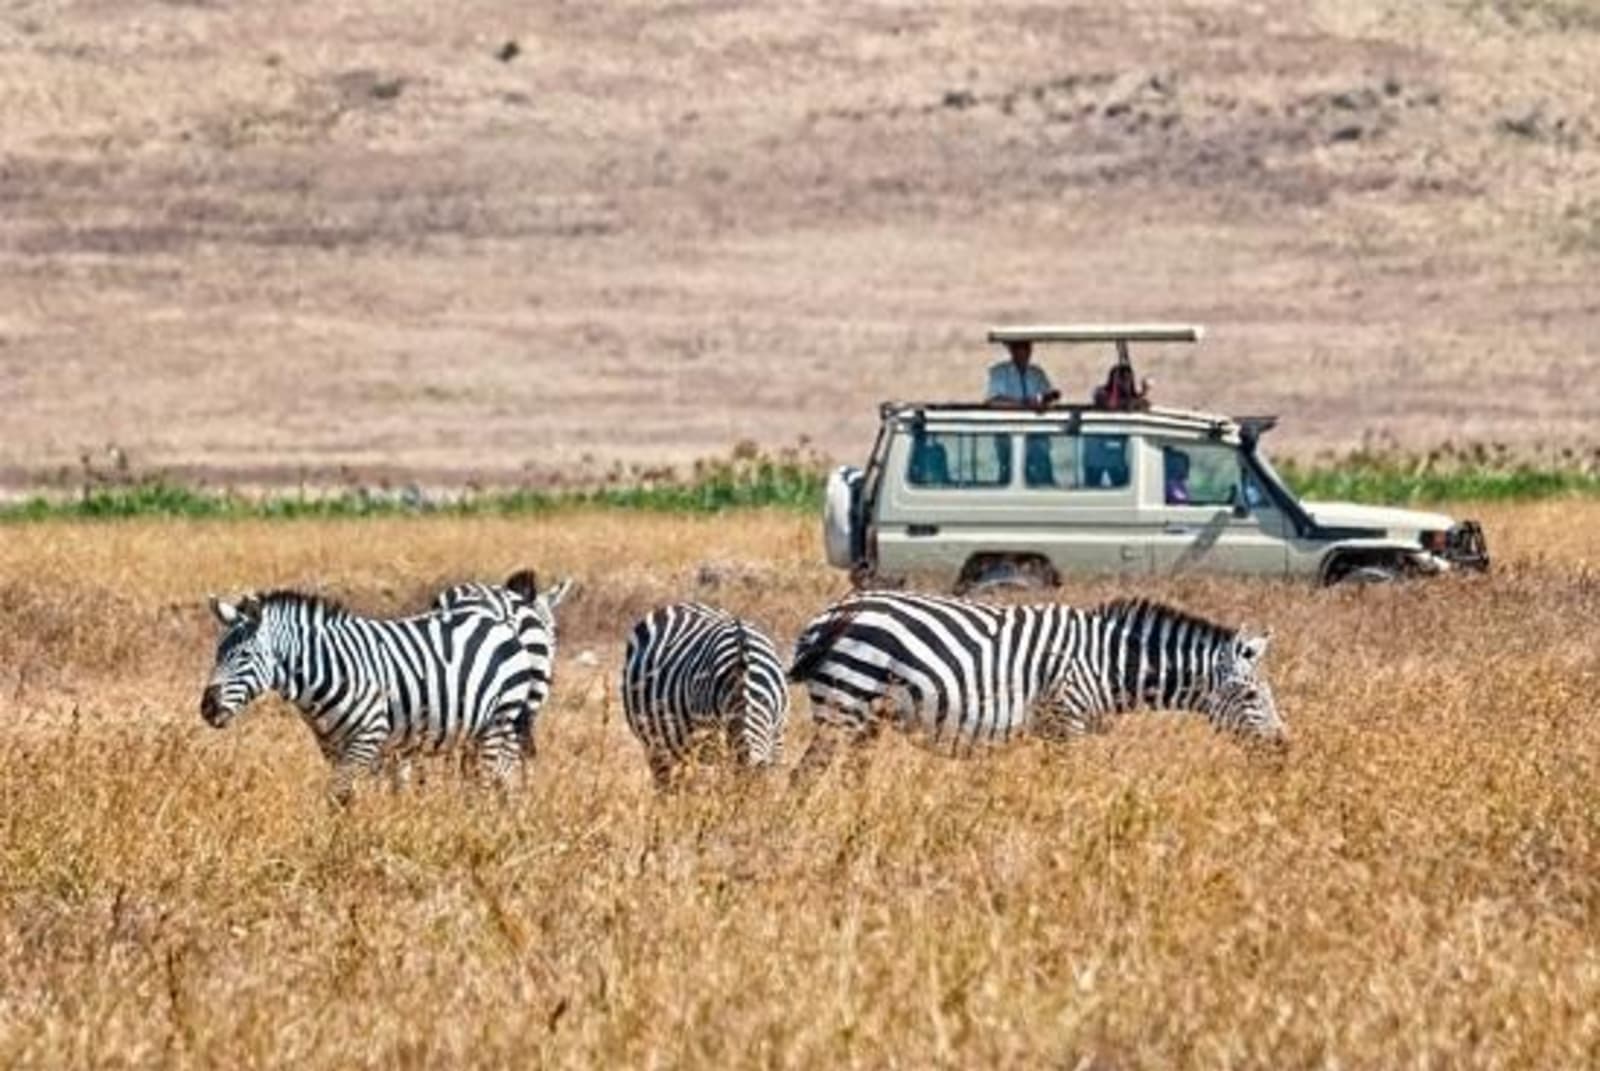 Tourists-watching-zebras-from-a-4x4-car-during-a-Safari_89466859.jpg